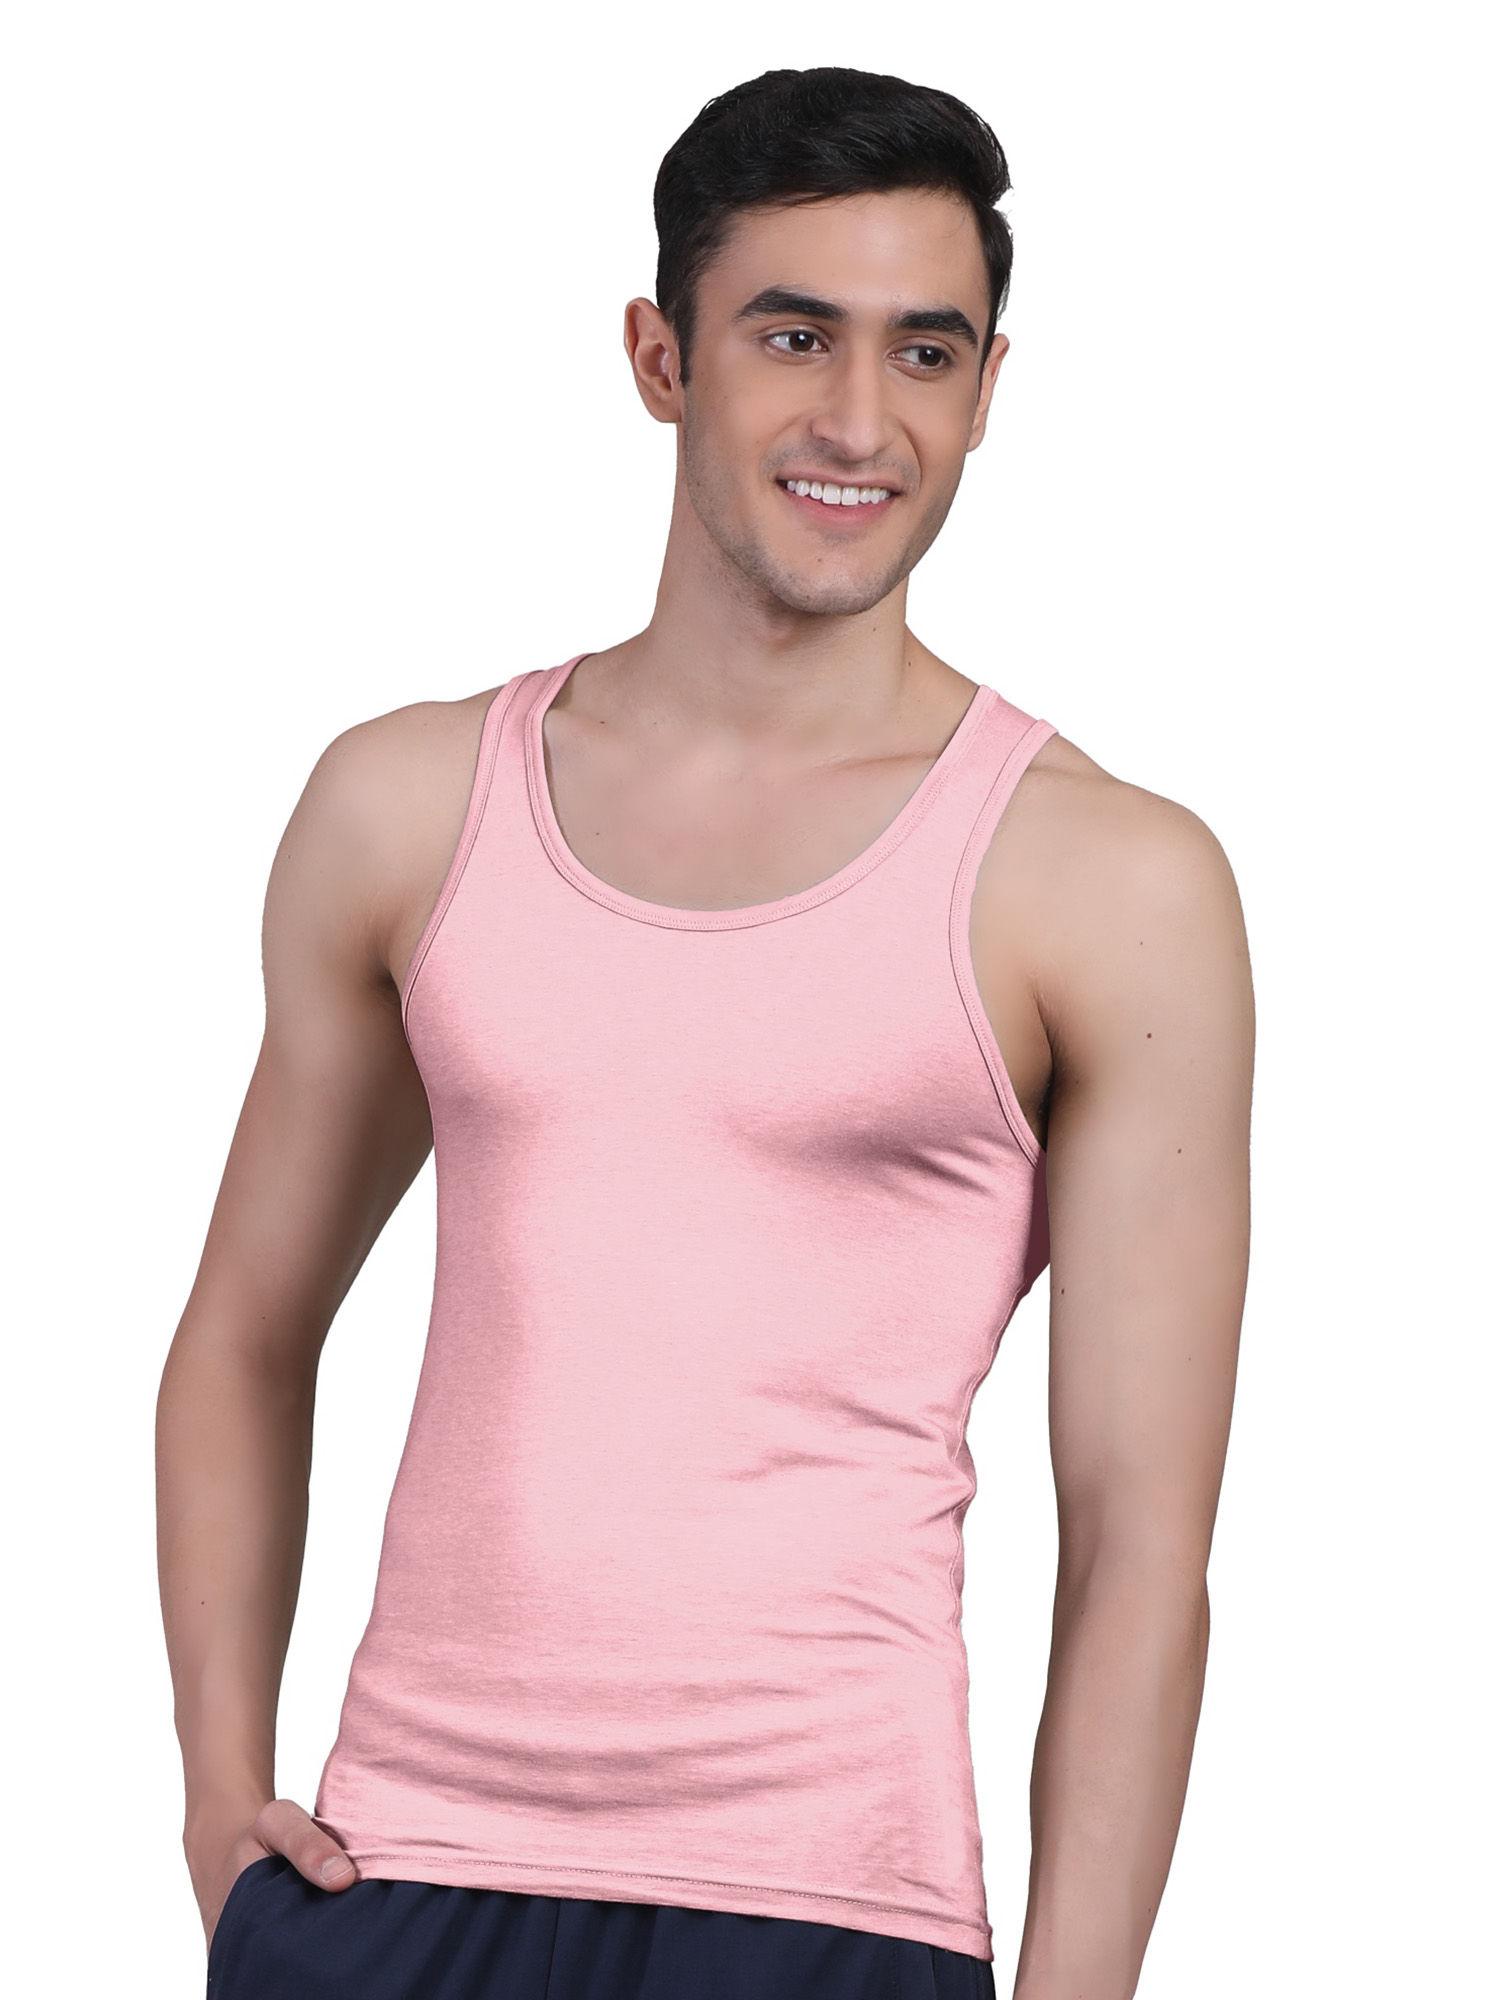 men's twin skin bamboo anti microbial breathtech cotton vest, pack of 1